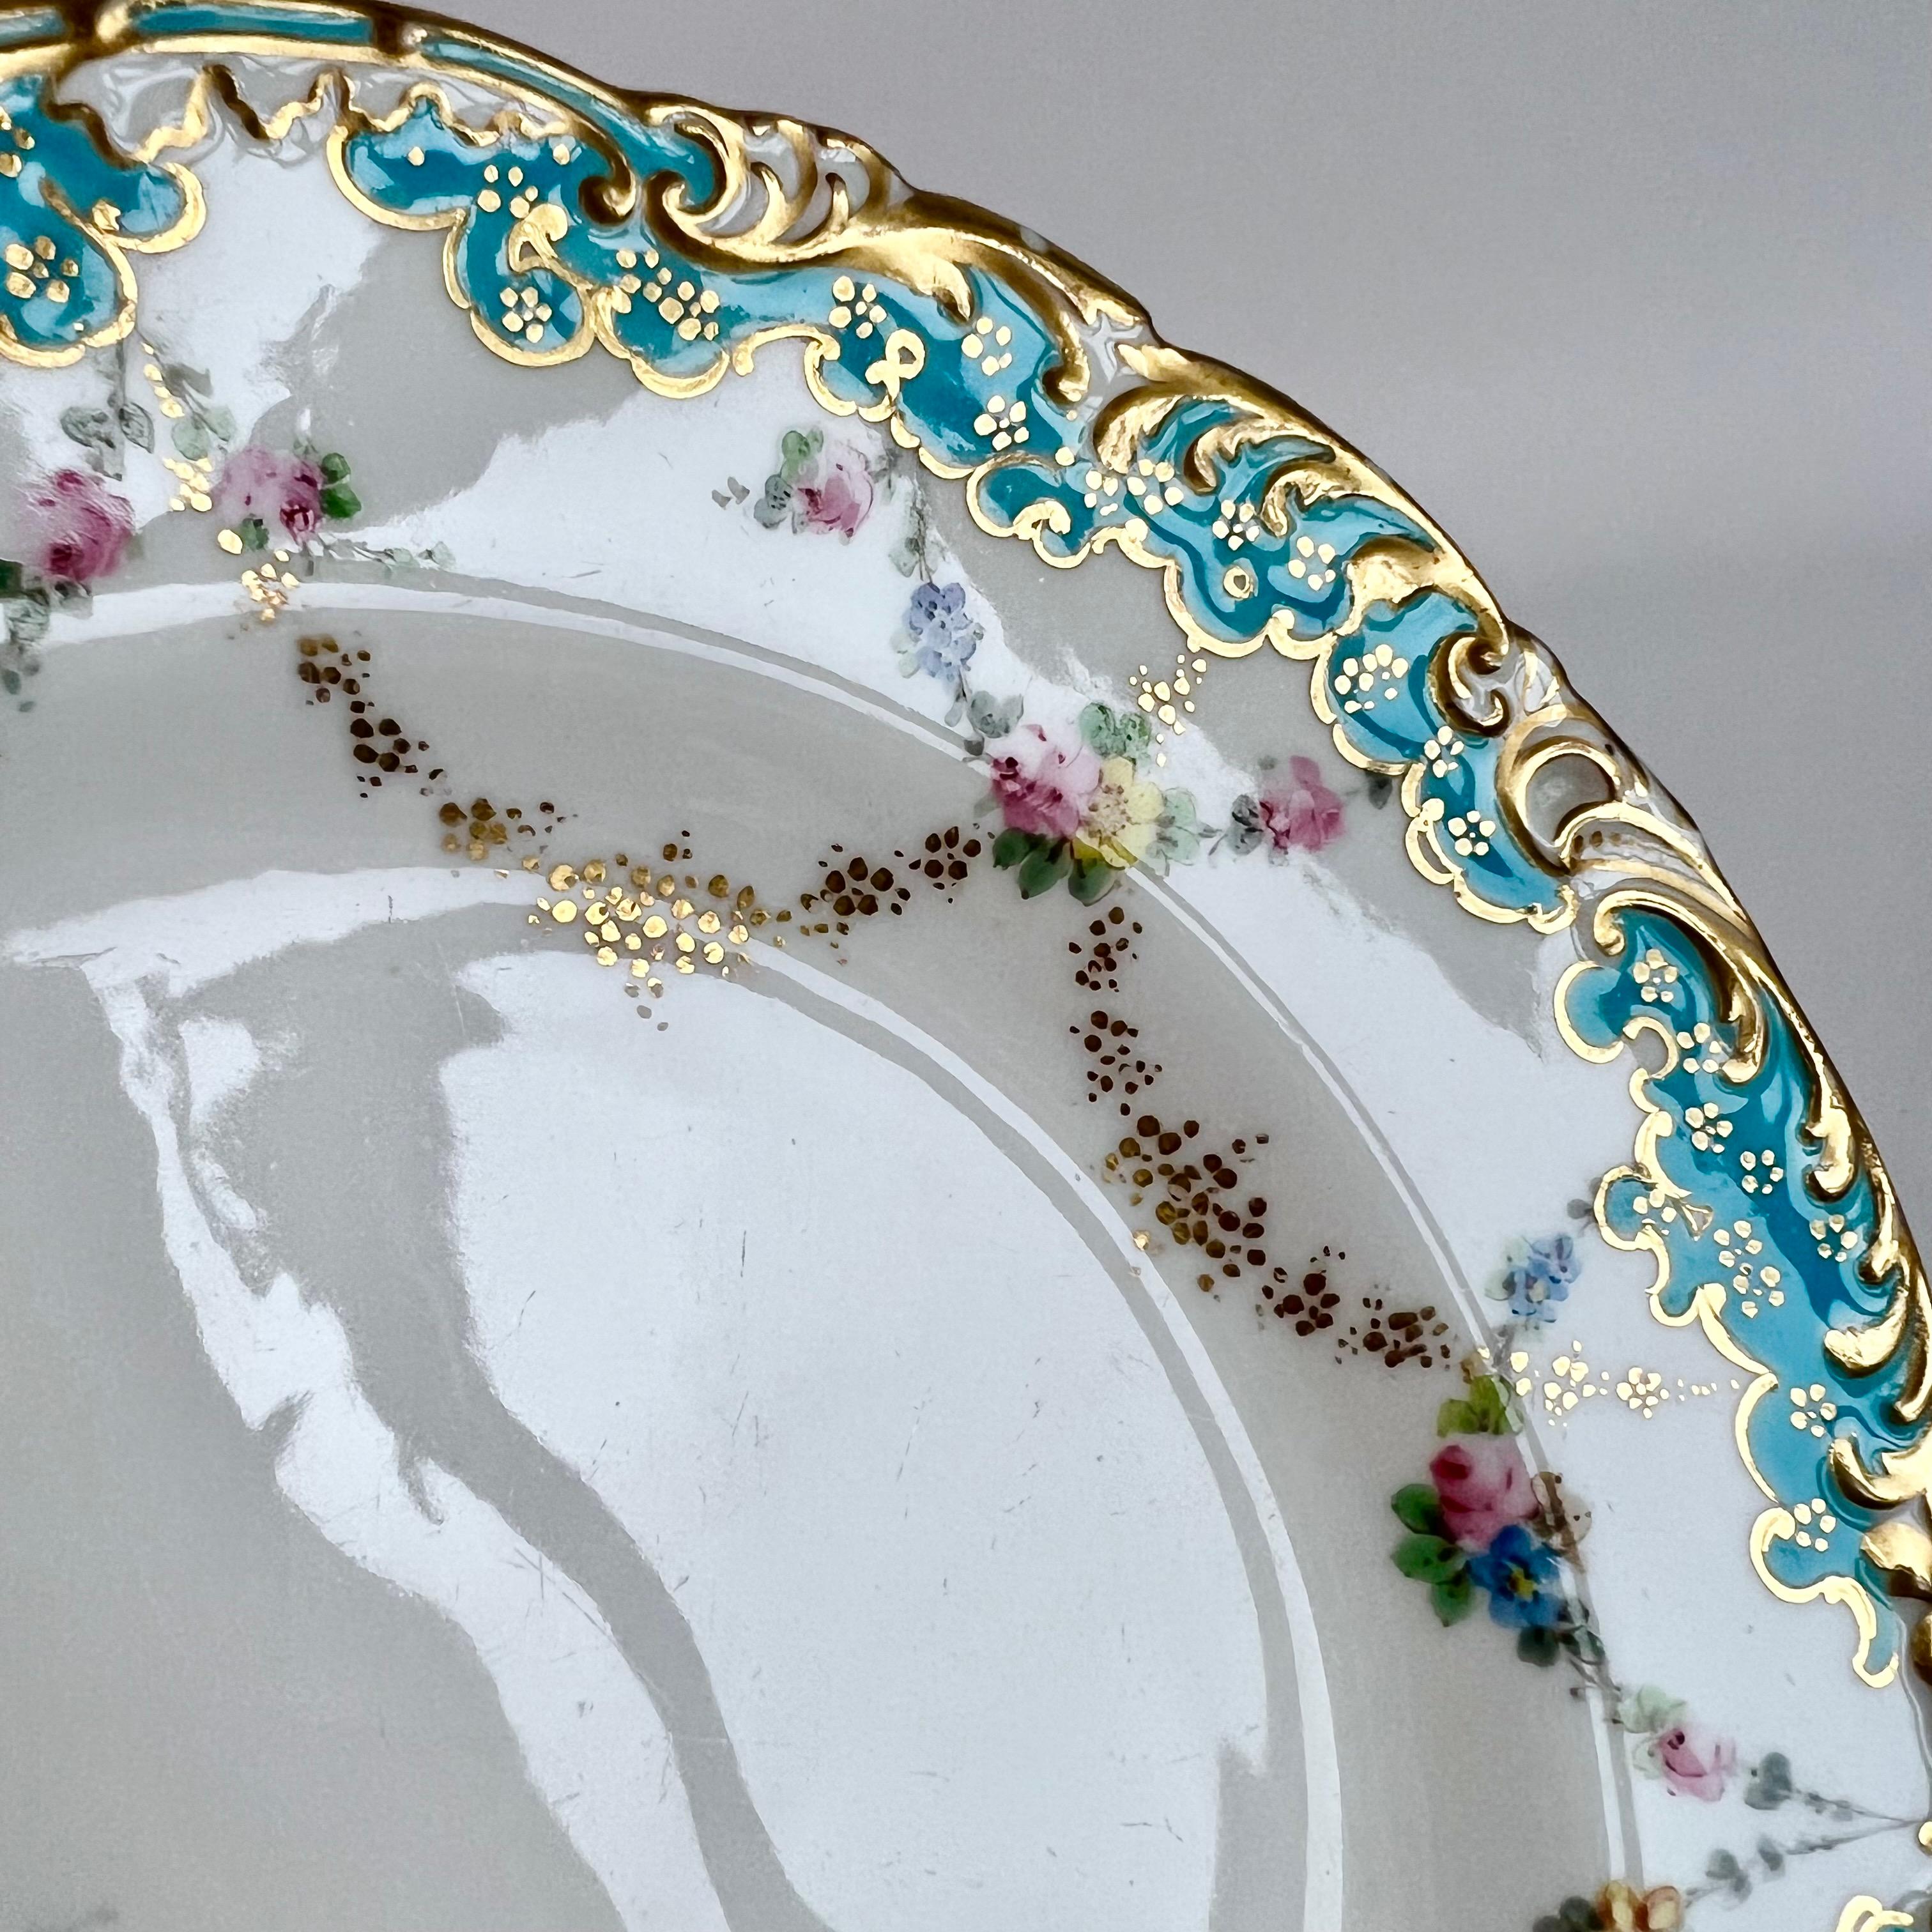 Royal Crown Derby Part Dessert Service, Turquoise with Flower Garlands, 1916 For Sale 7